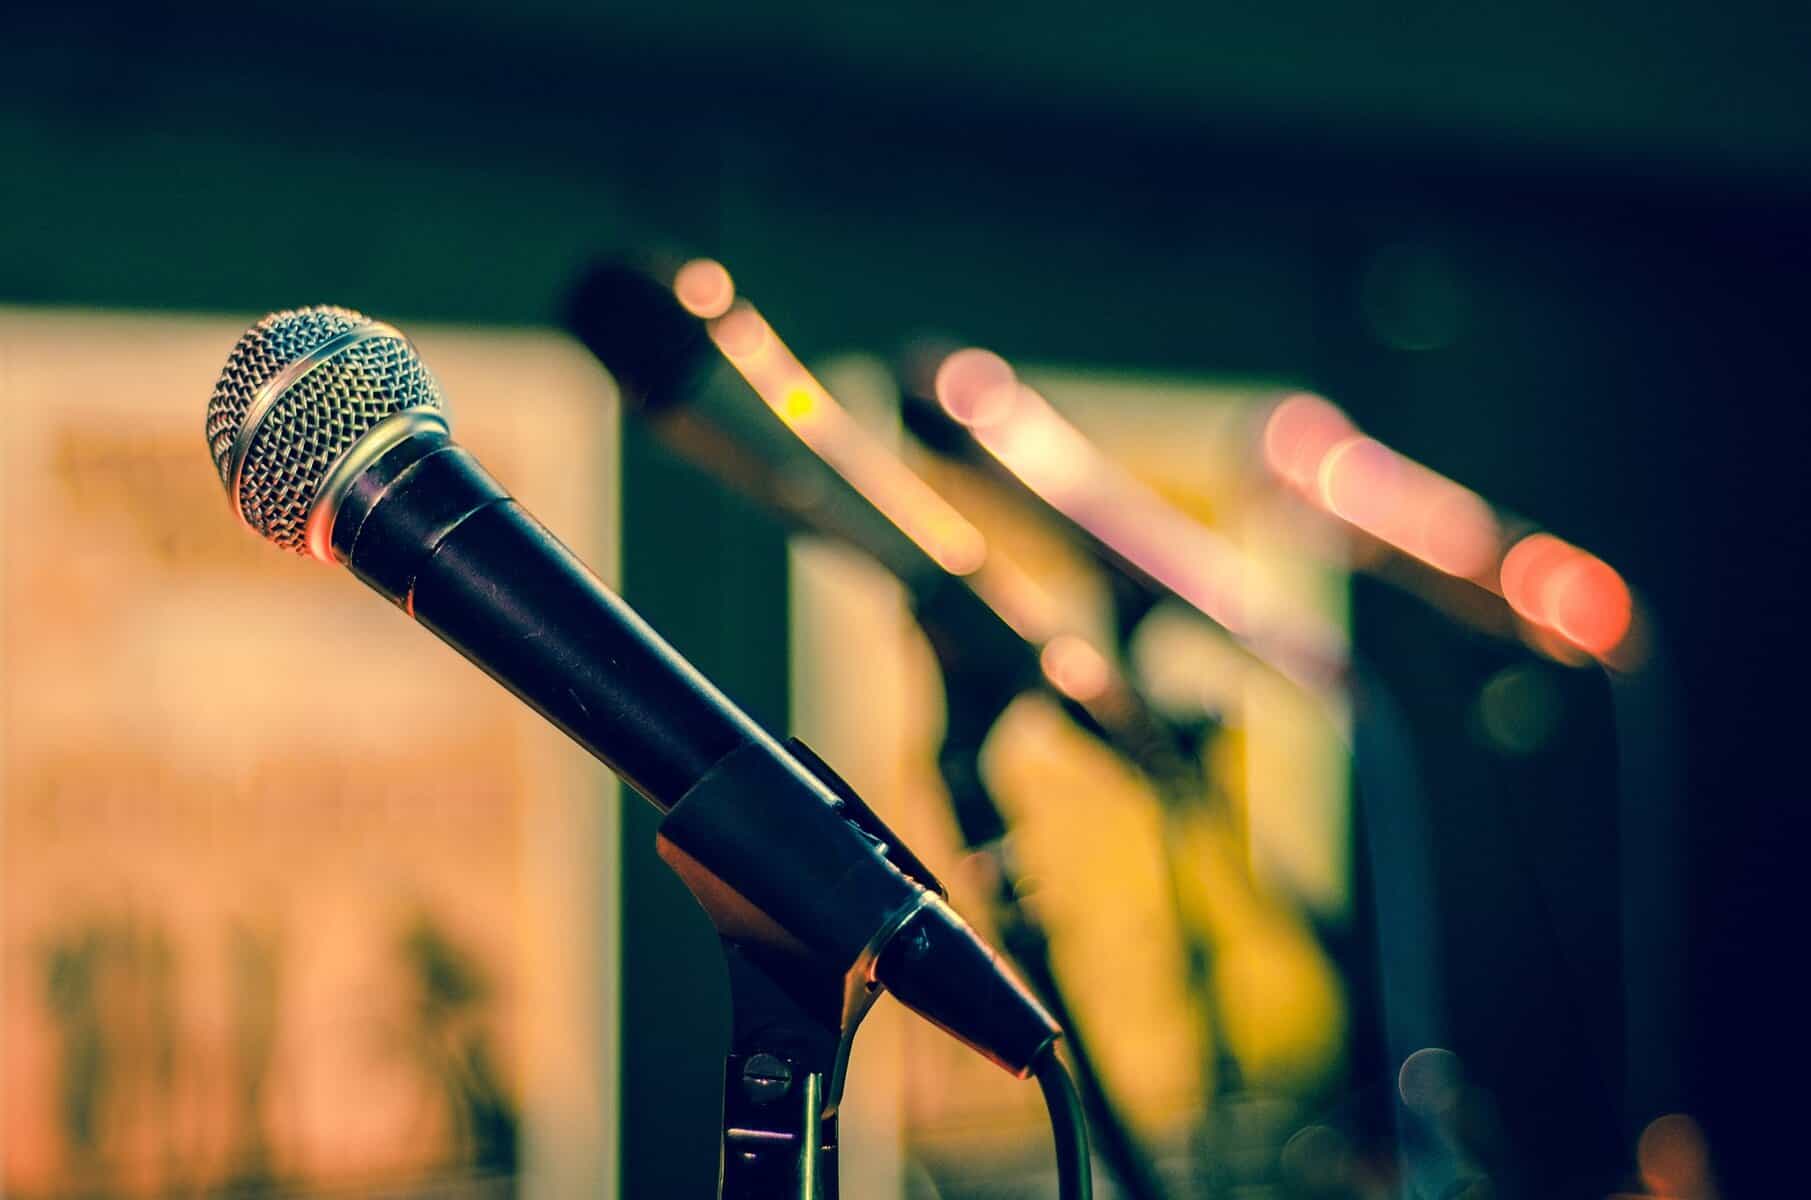 Microphones are shown lined up and on stands with the closest one being in focus.